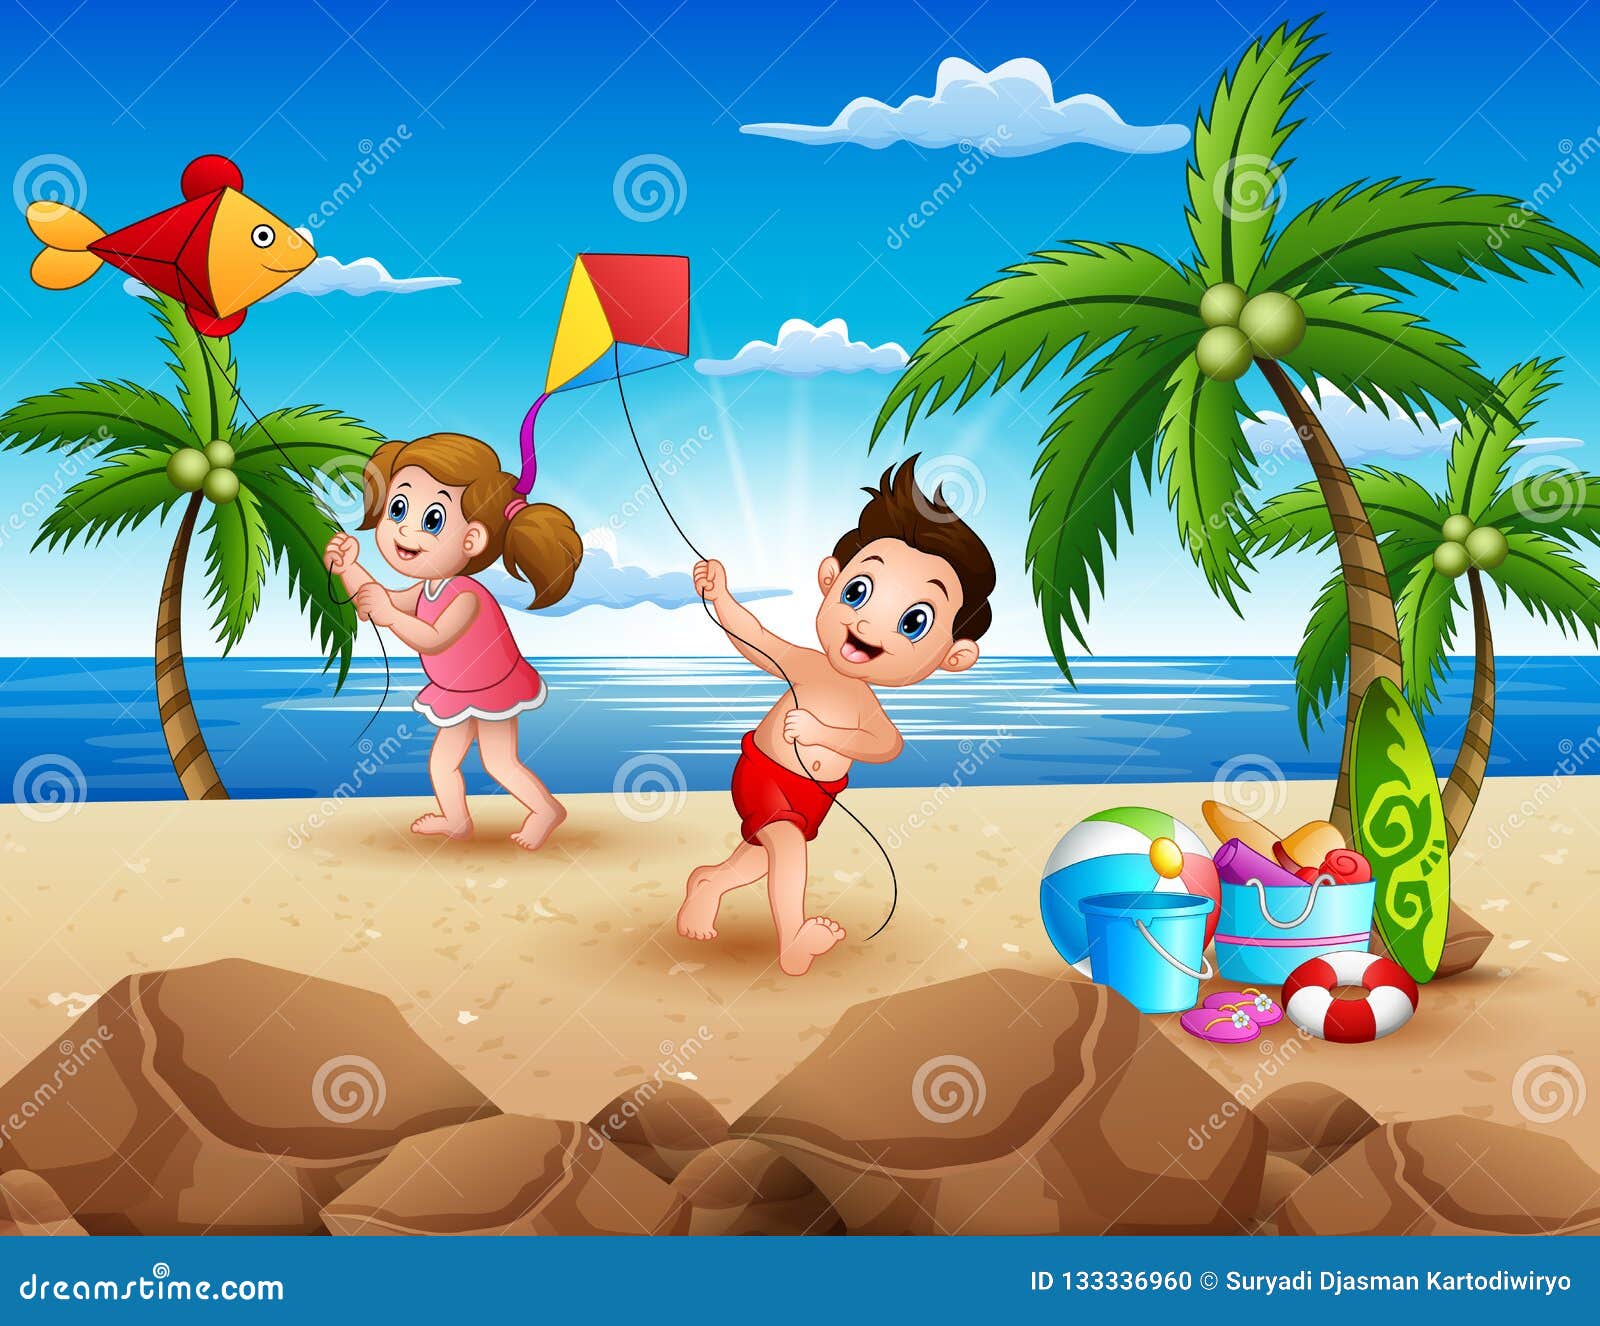 cartoon of little children playing with kites on the beach